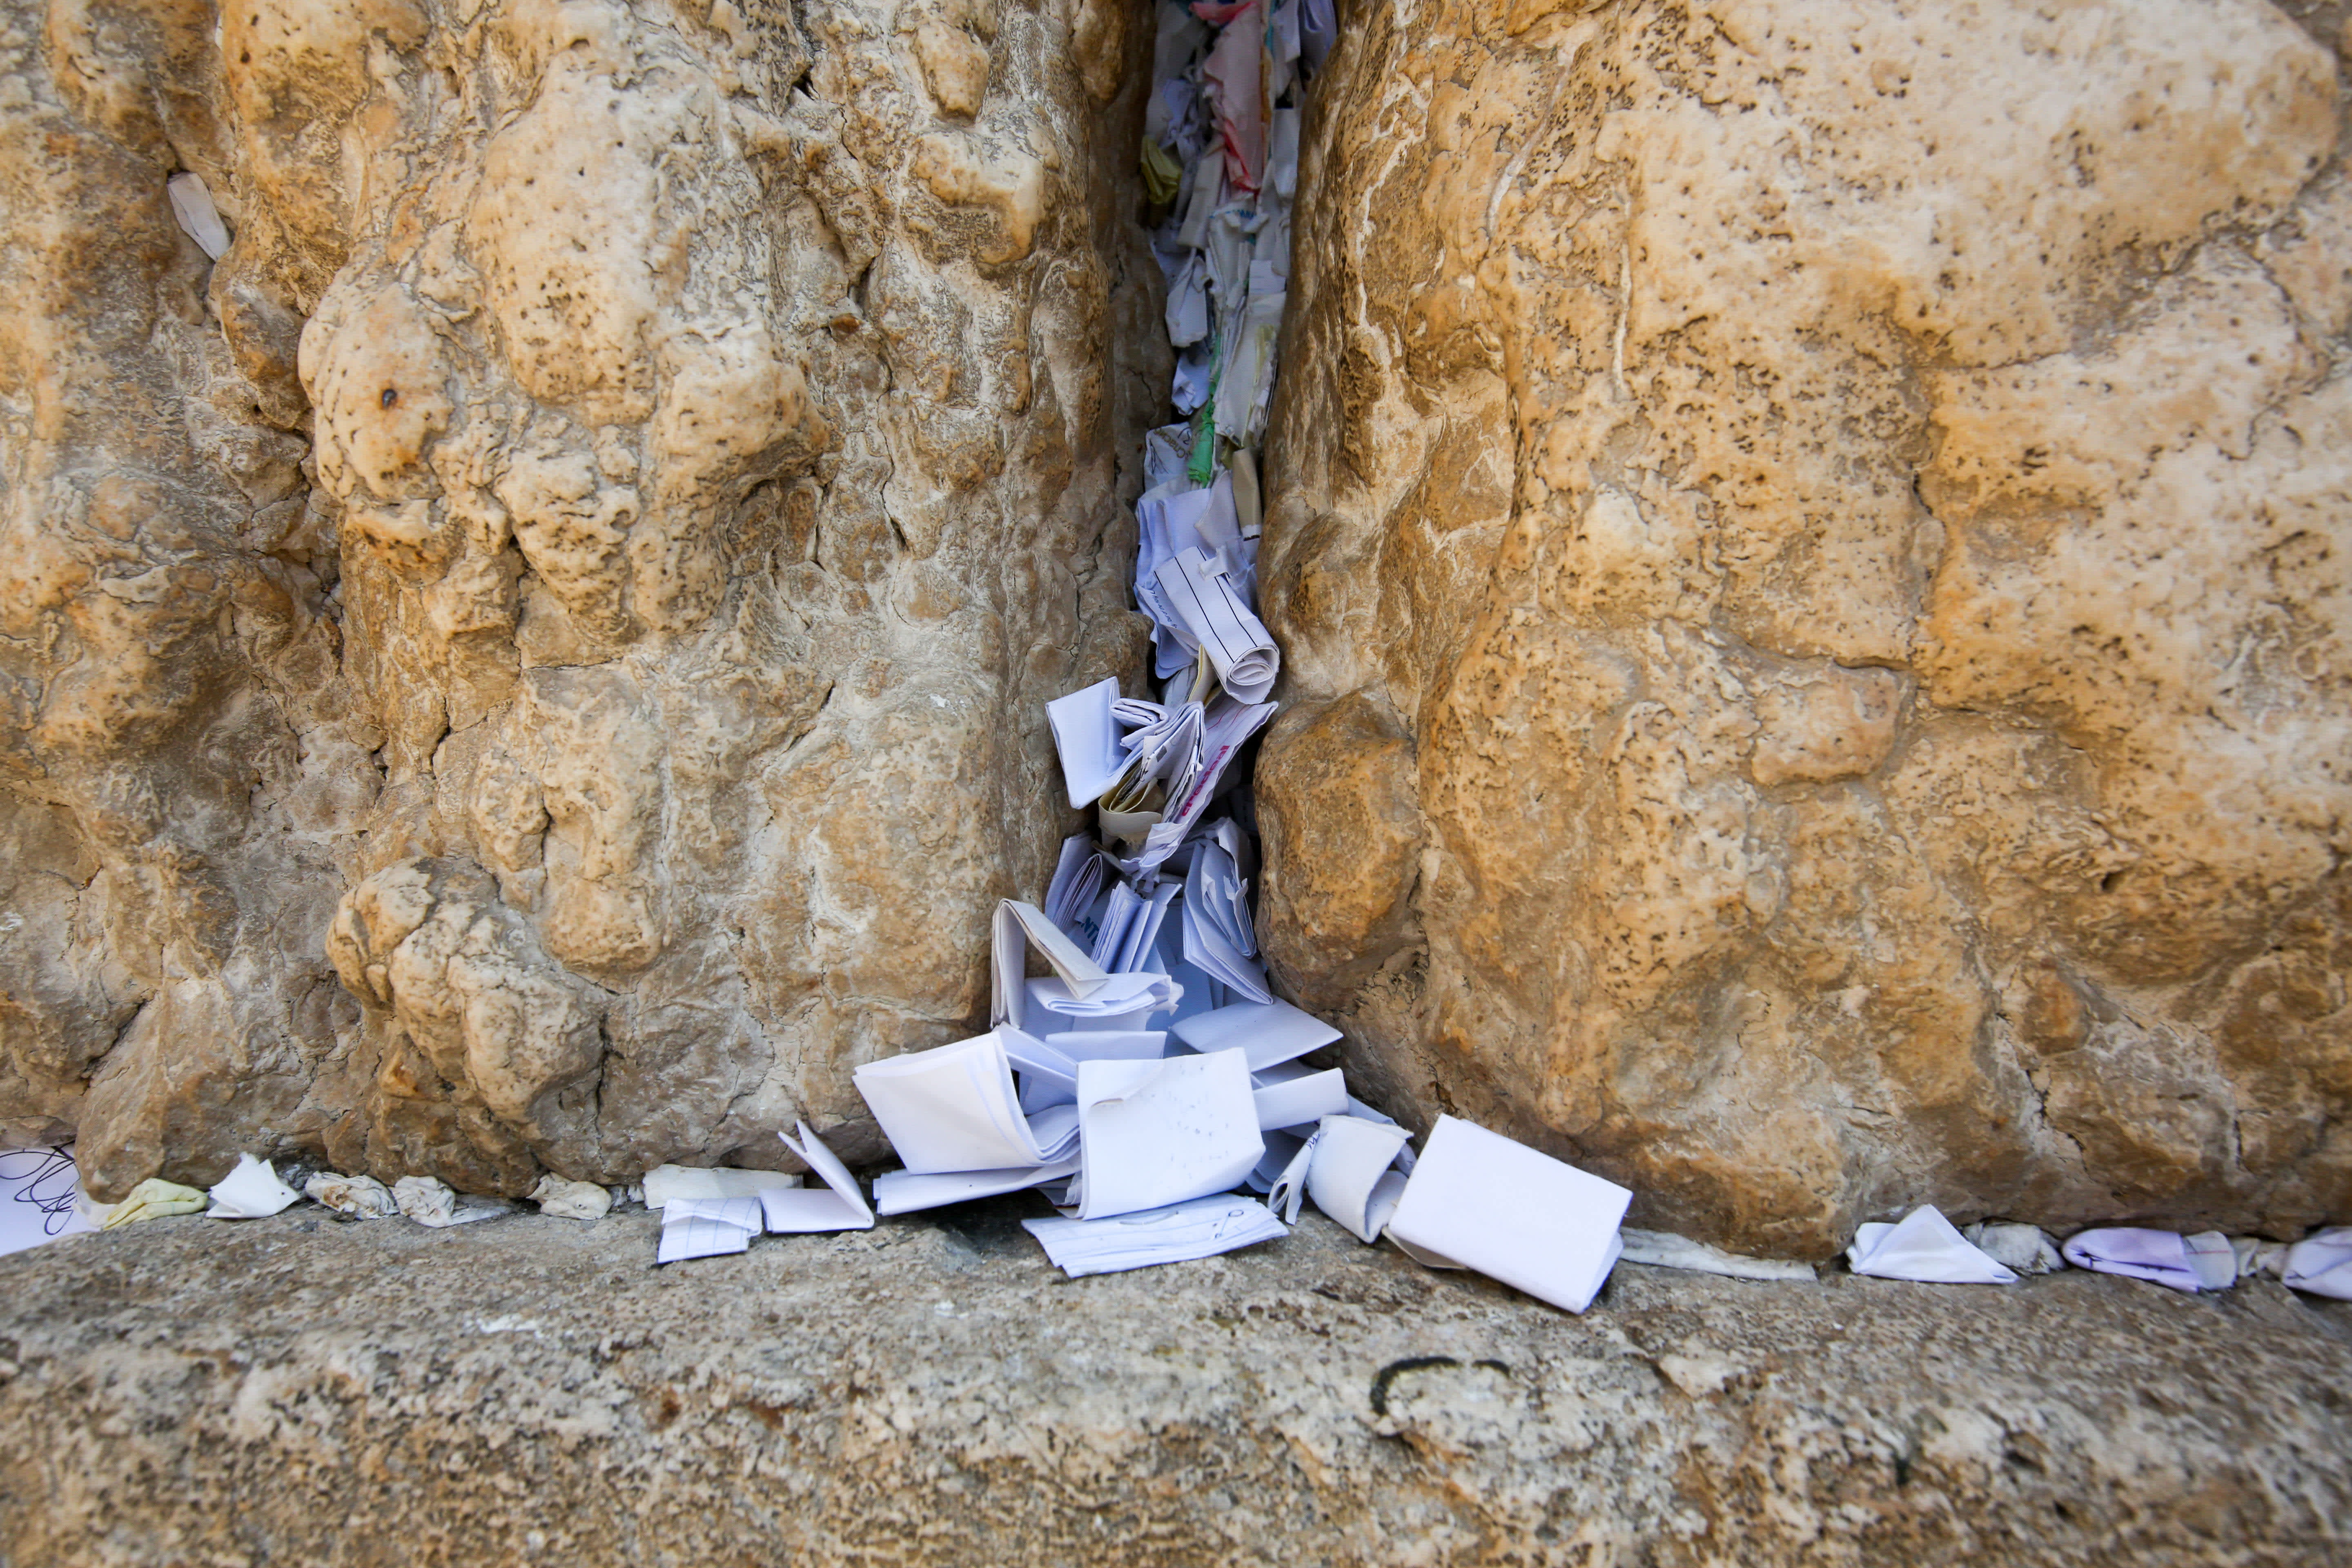  Notes placed in the Western Wall prior to Rosh Hashana cleaning